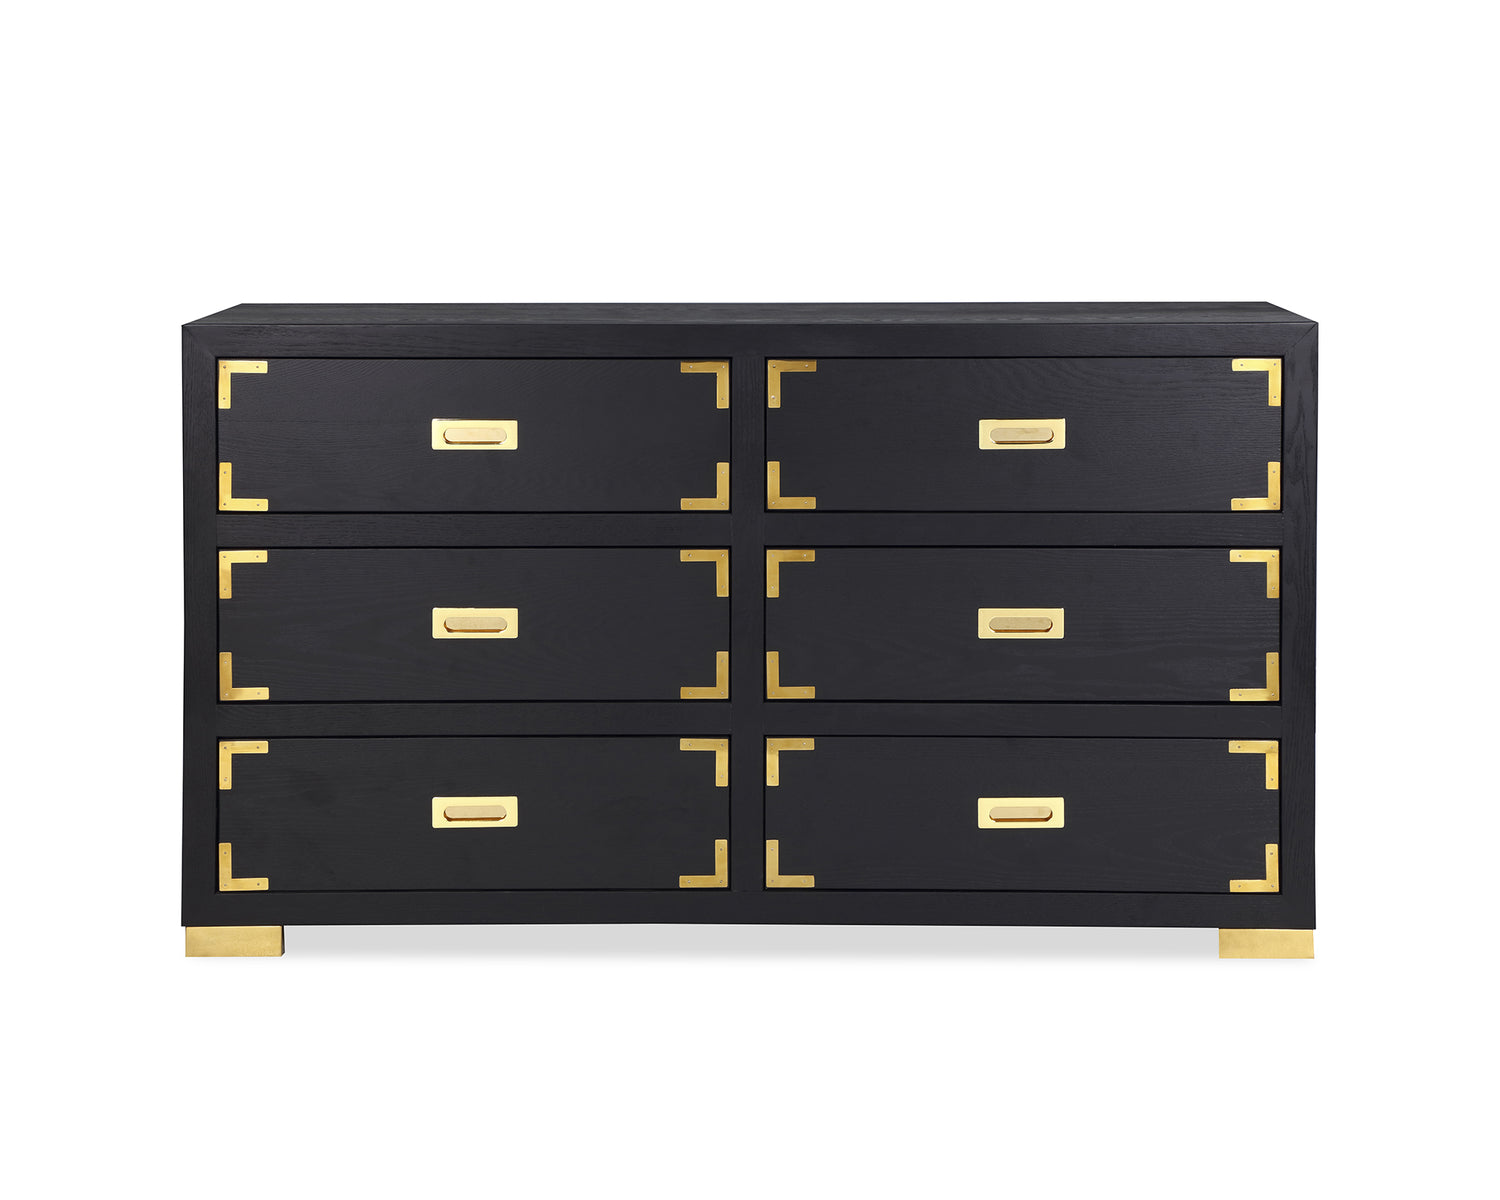  LiangAndEimilLarge-Liang & Eimil Genoa Chest of Drawers Brass Detail- 77 